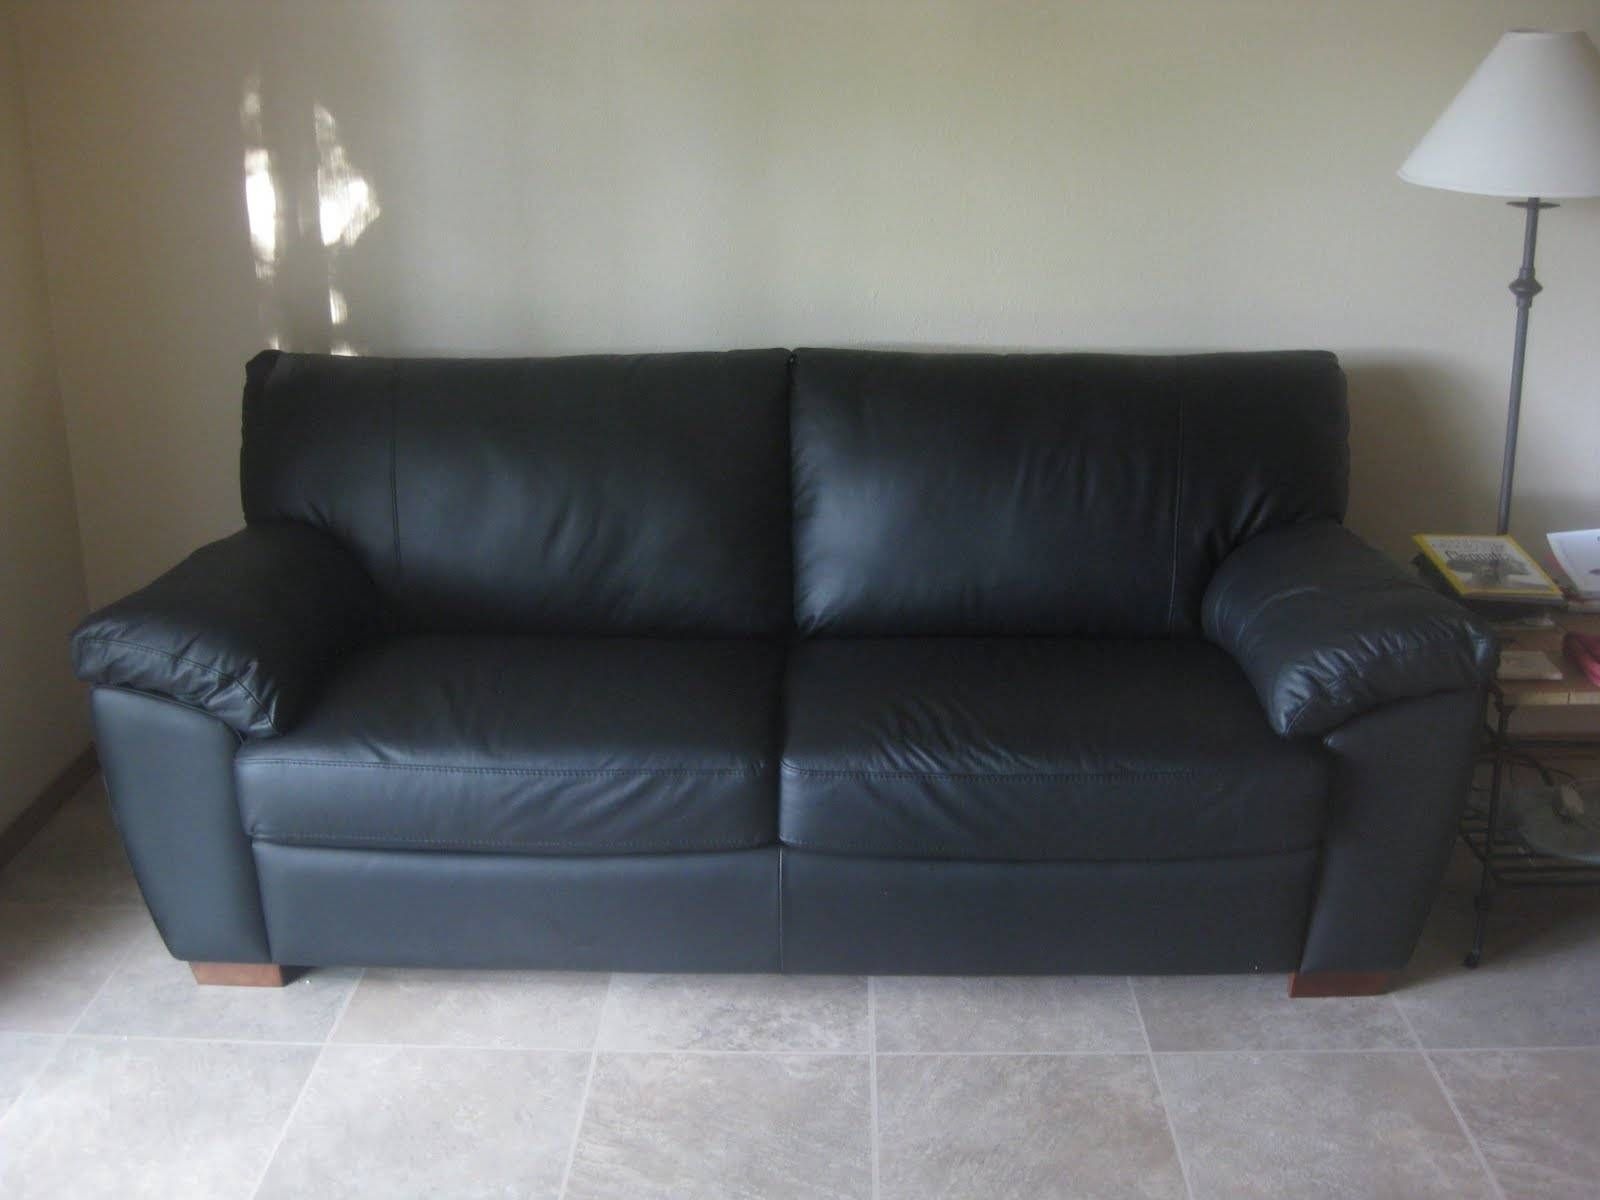 Unique Curved Black Leather Sofa Cool Couch Cover Ideas W Pertaining To Sofas With Black Cover (View 9 of 15)